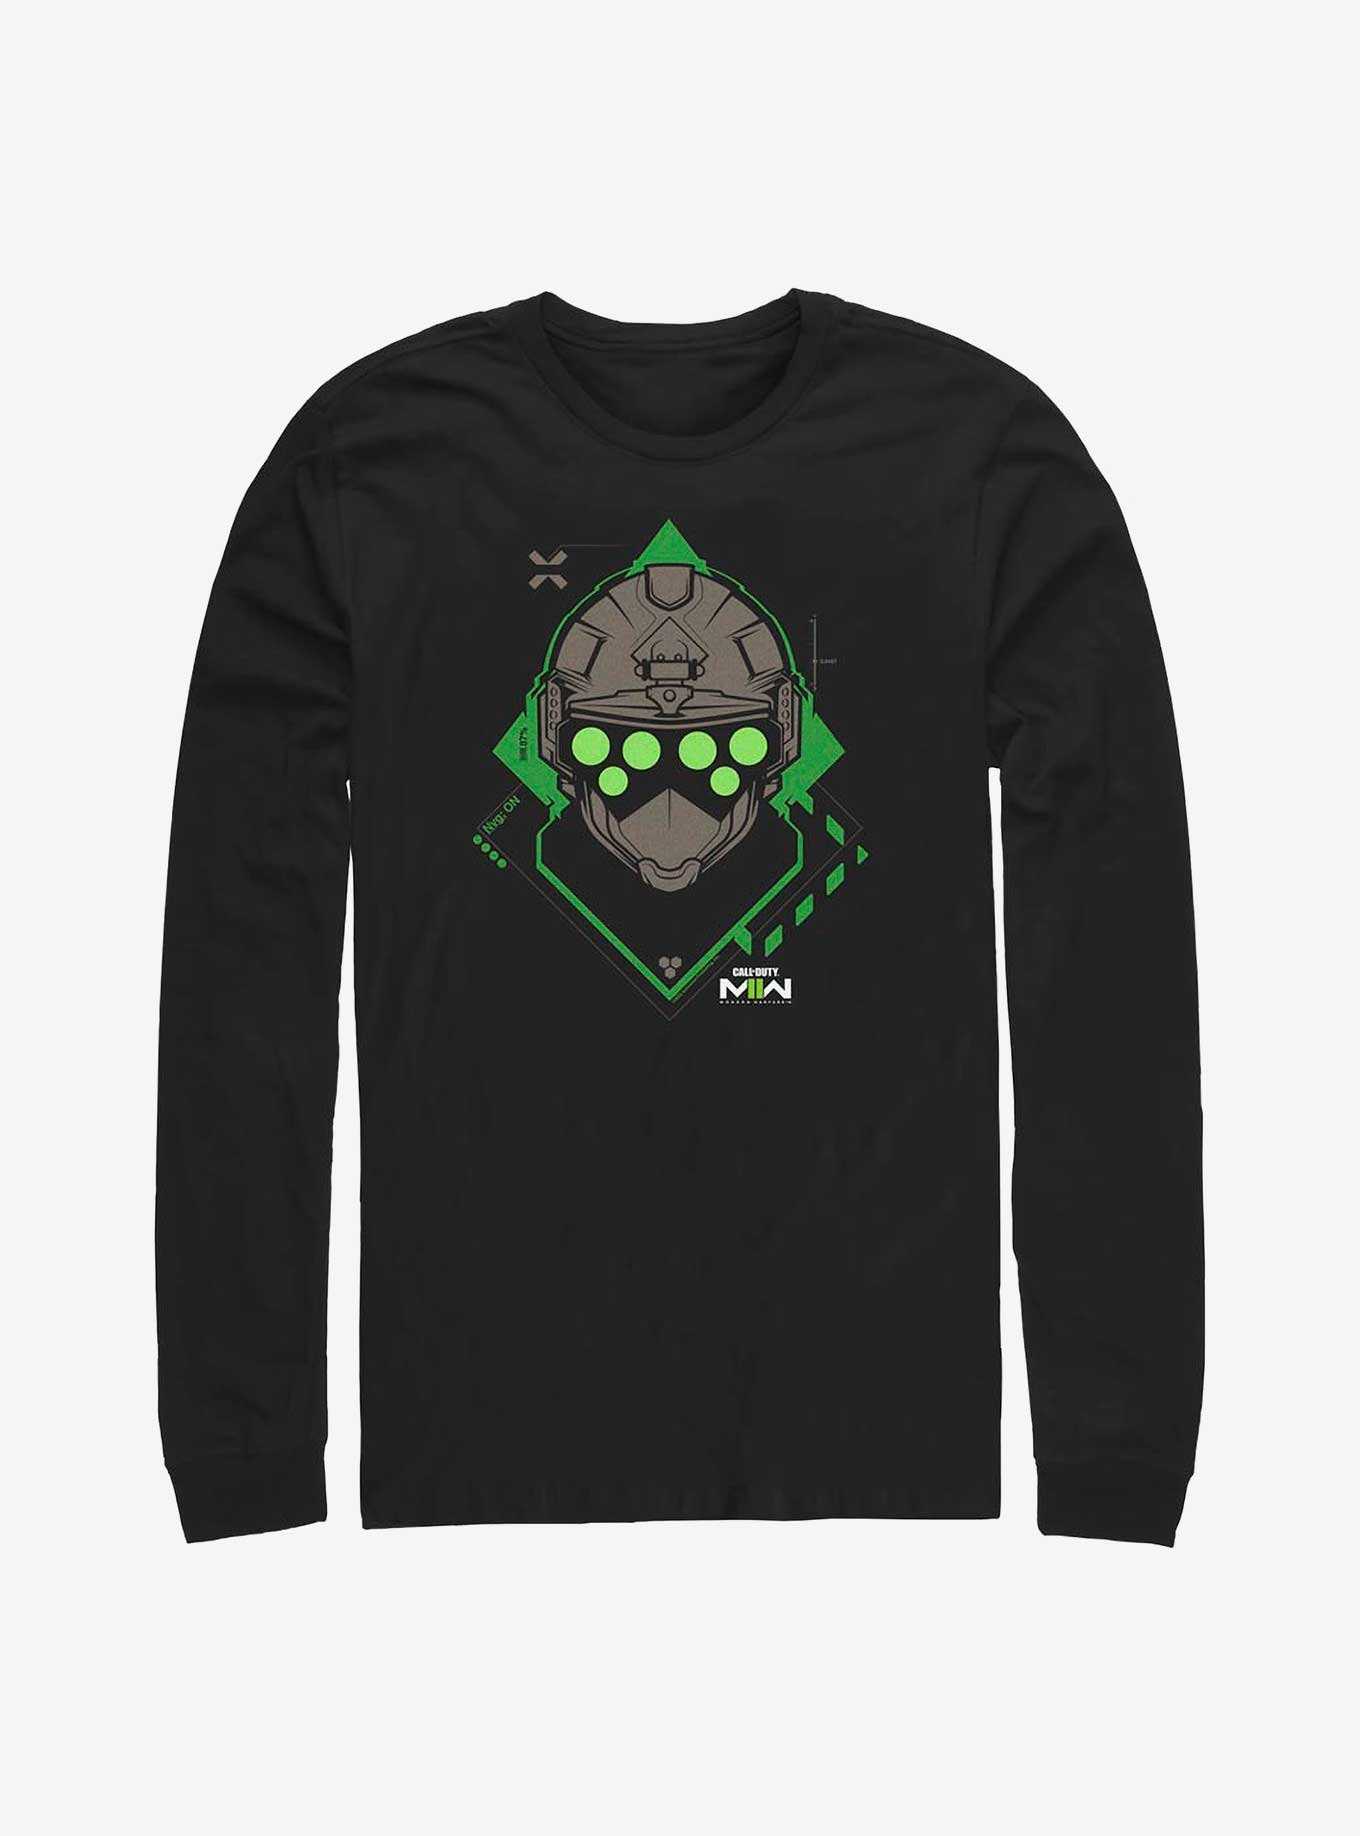 Call Of Duty Night Vision On Long Sleeve T-Shirt, , hi-res